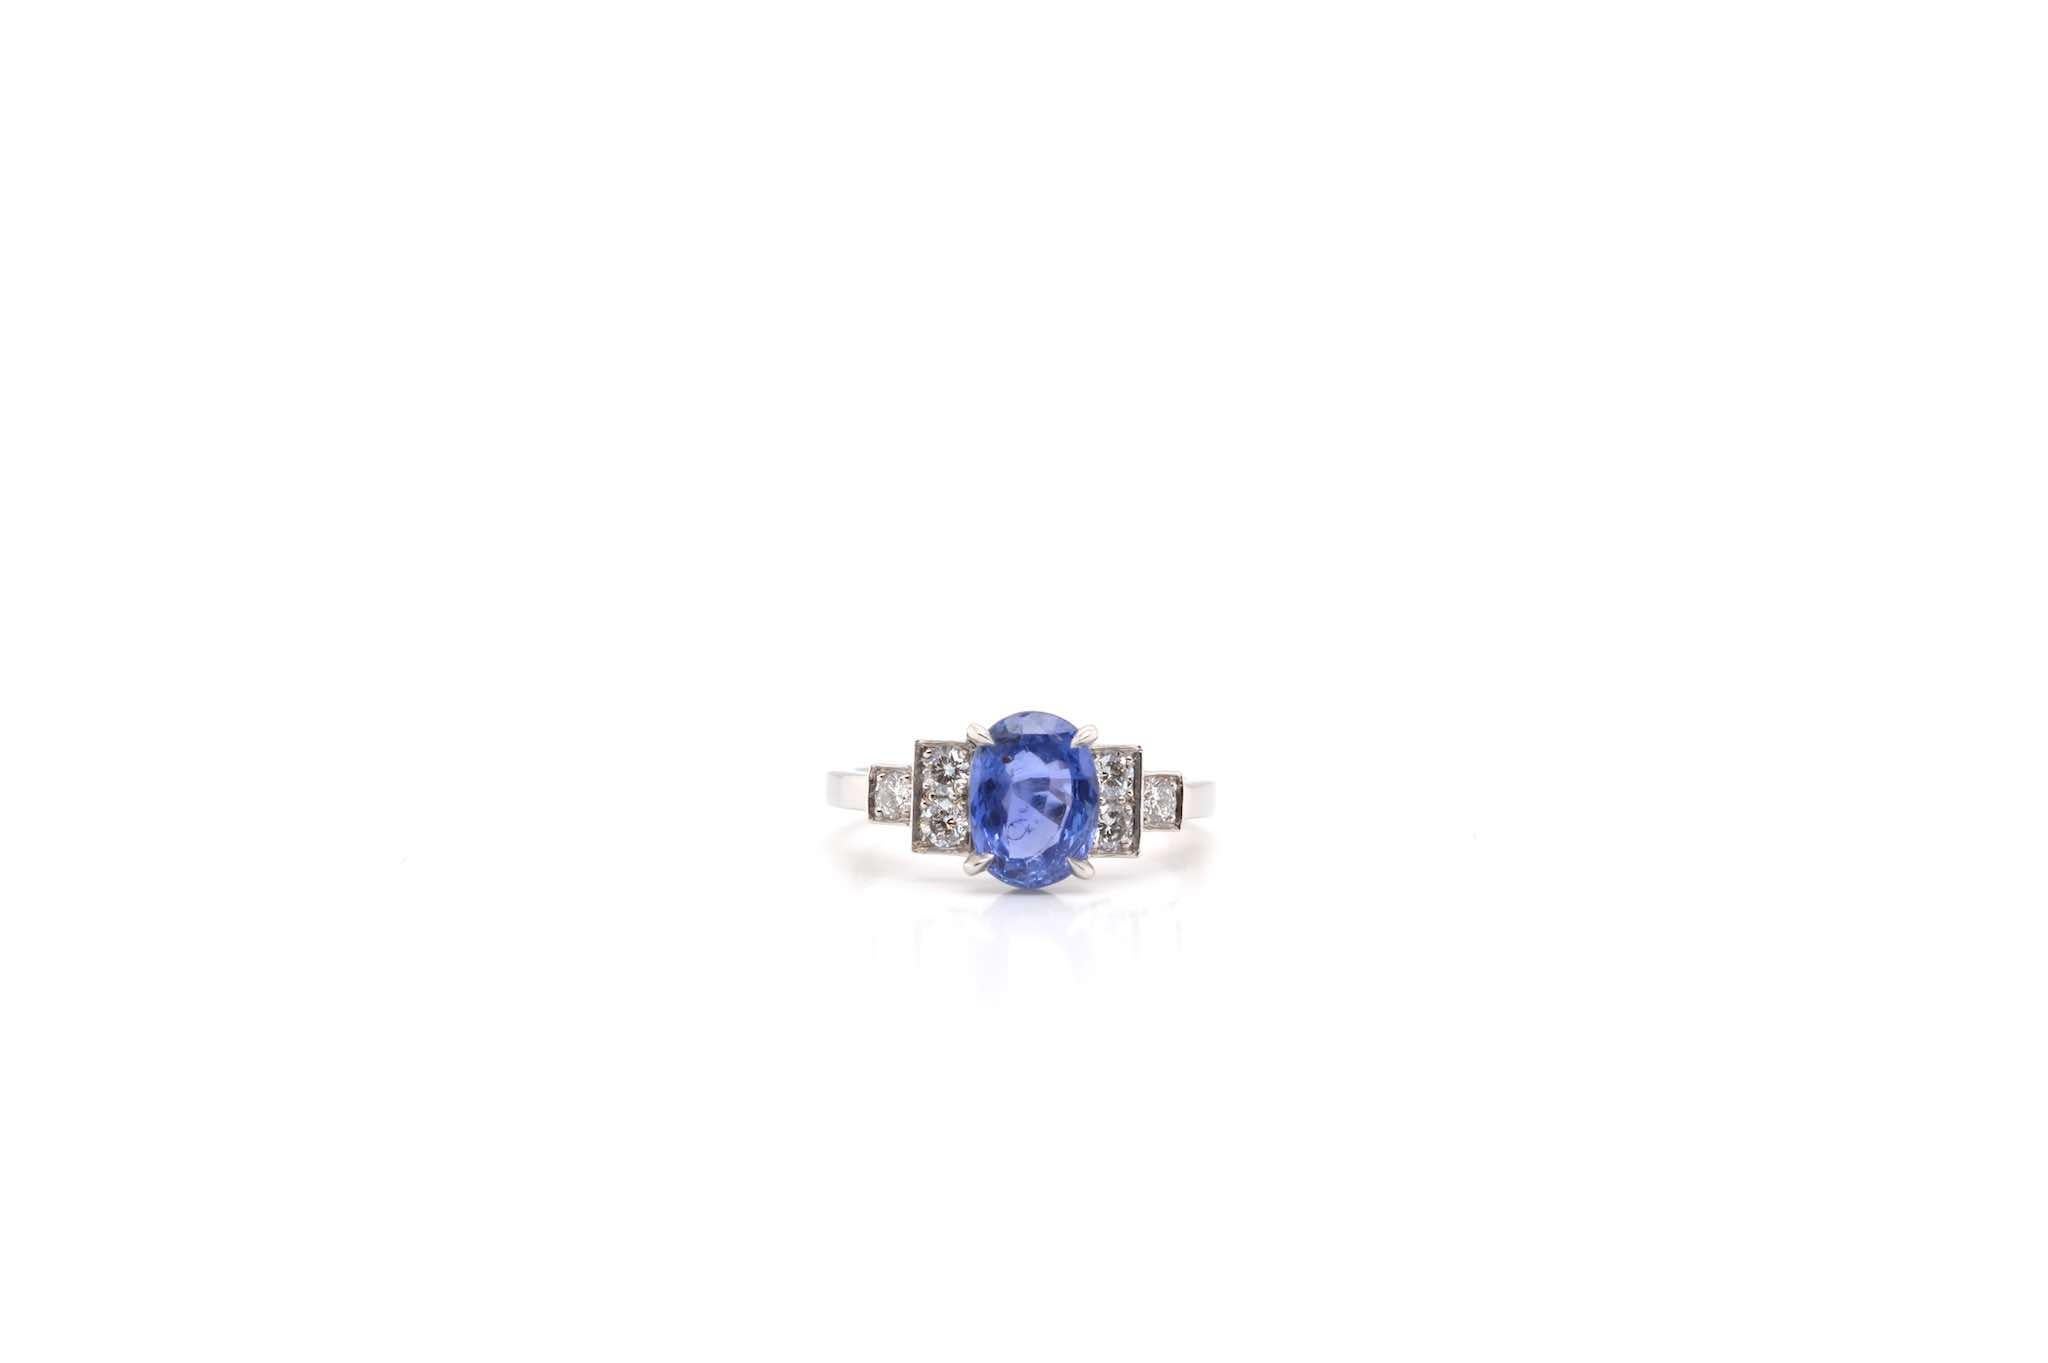 Stones: Ceylon Sapphire of 2.14 carats
and brilliant cut diamonds for a total weight of 0.35 carats.
Material: Platinum
Dimensions: 9 mm length on finger
Weight: 5.1g
Size: 53 (free sizing)
Certificate
Ref. : 24455 /24744
​